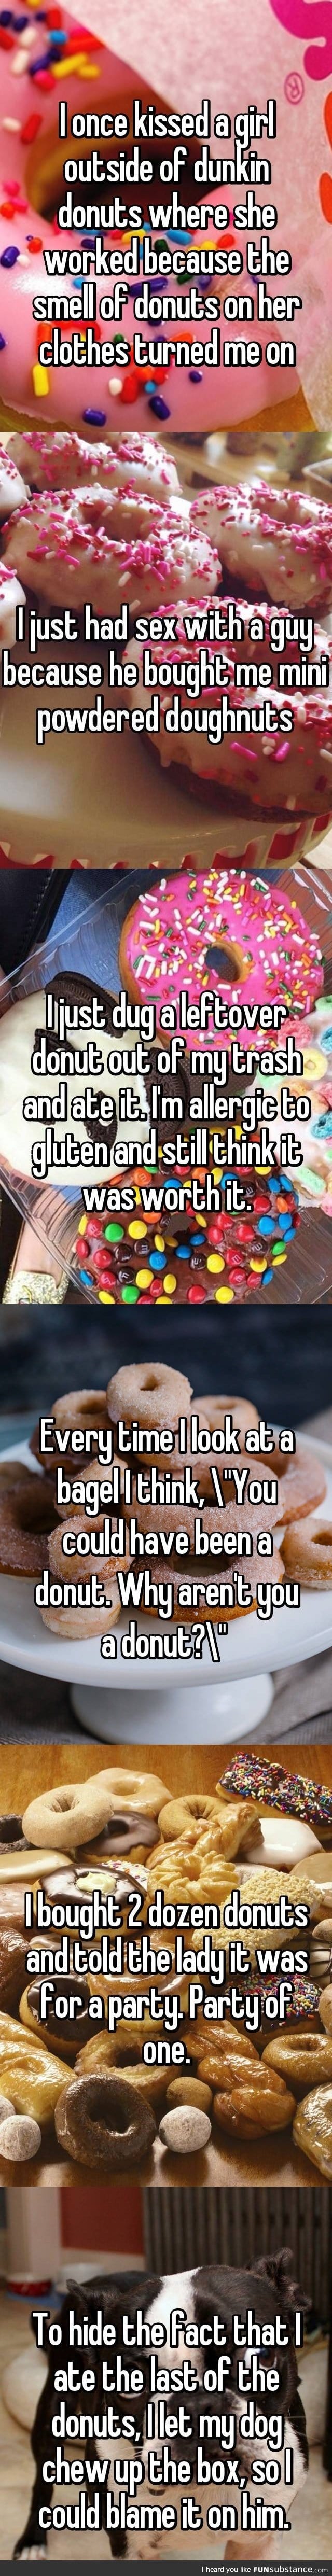 donut confessions